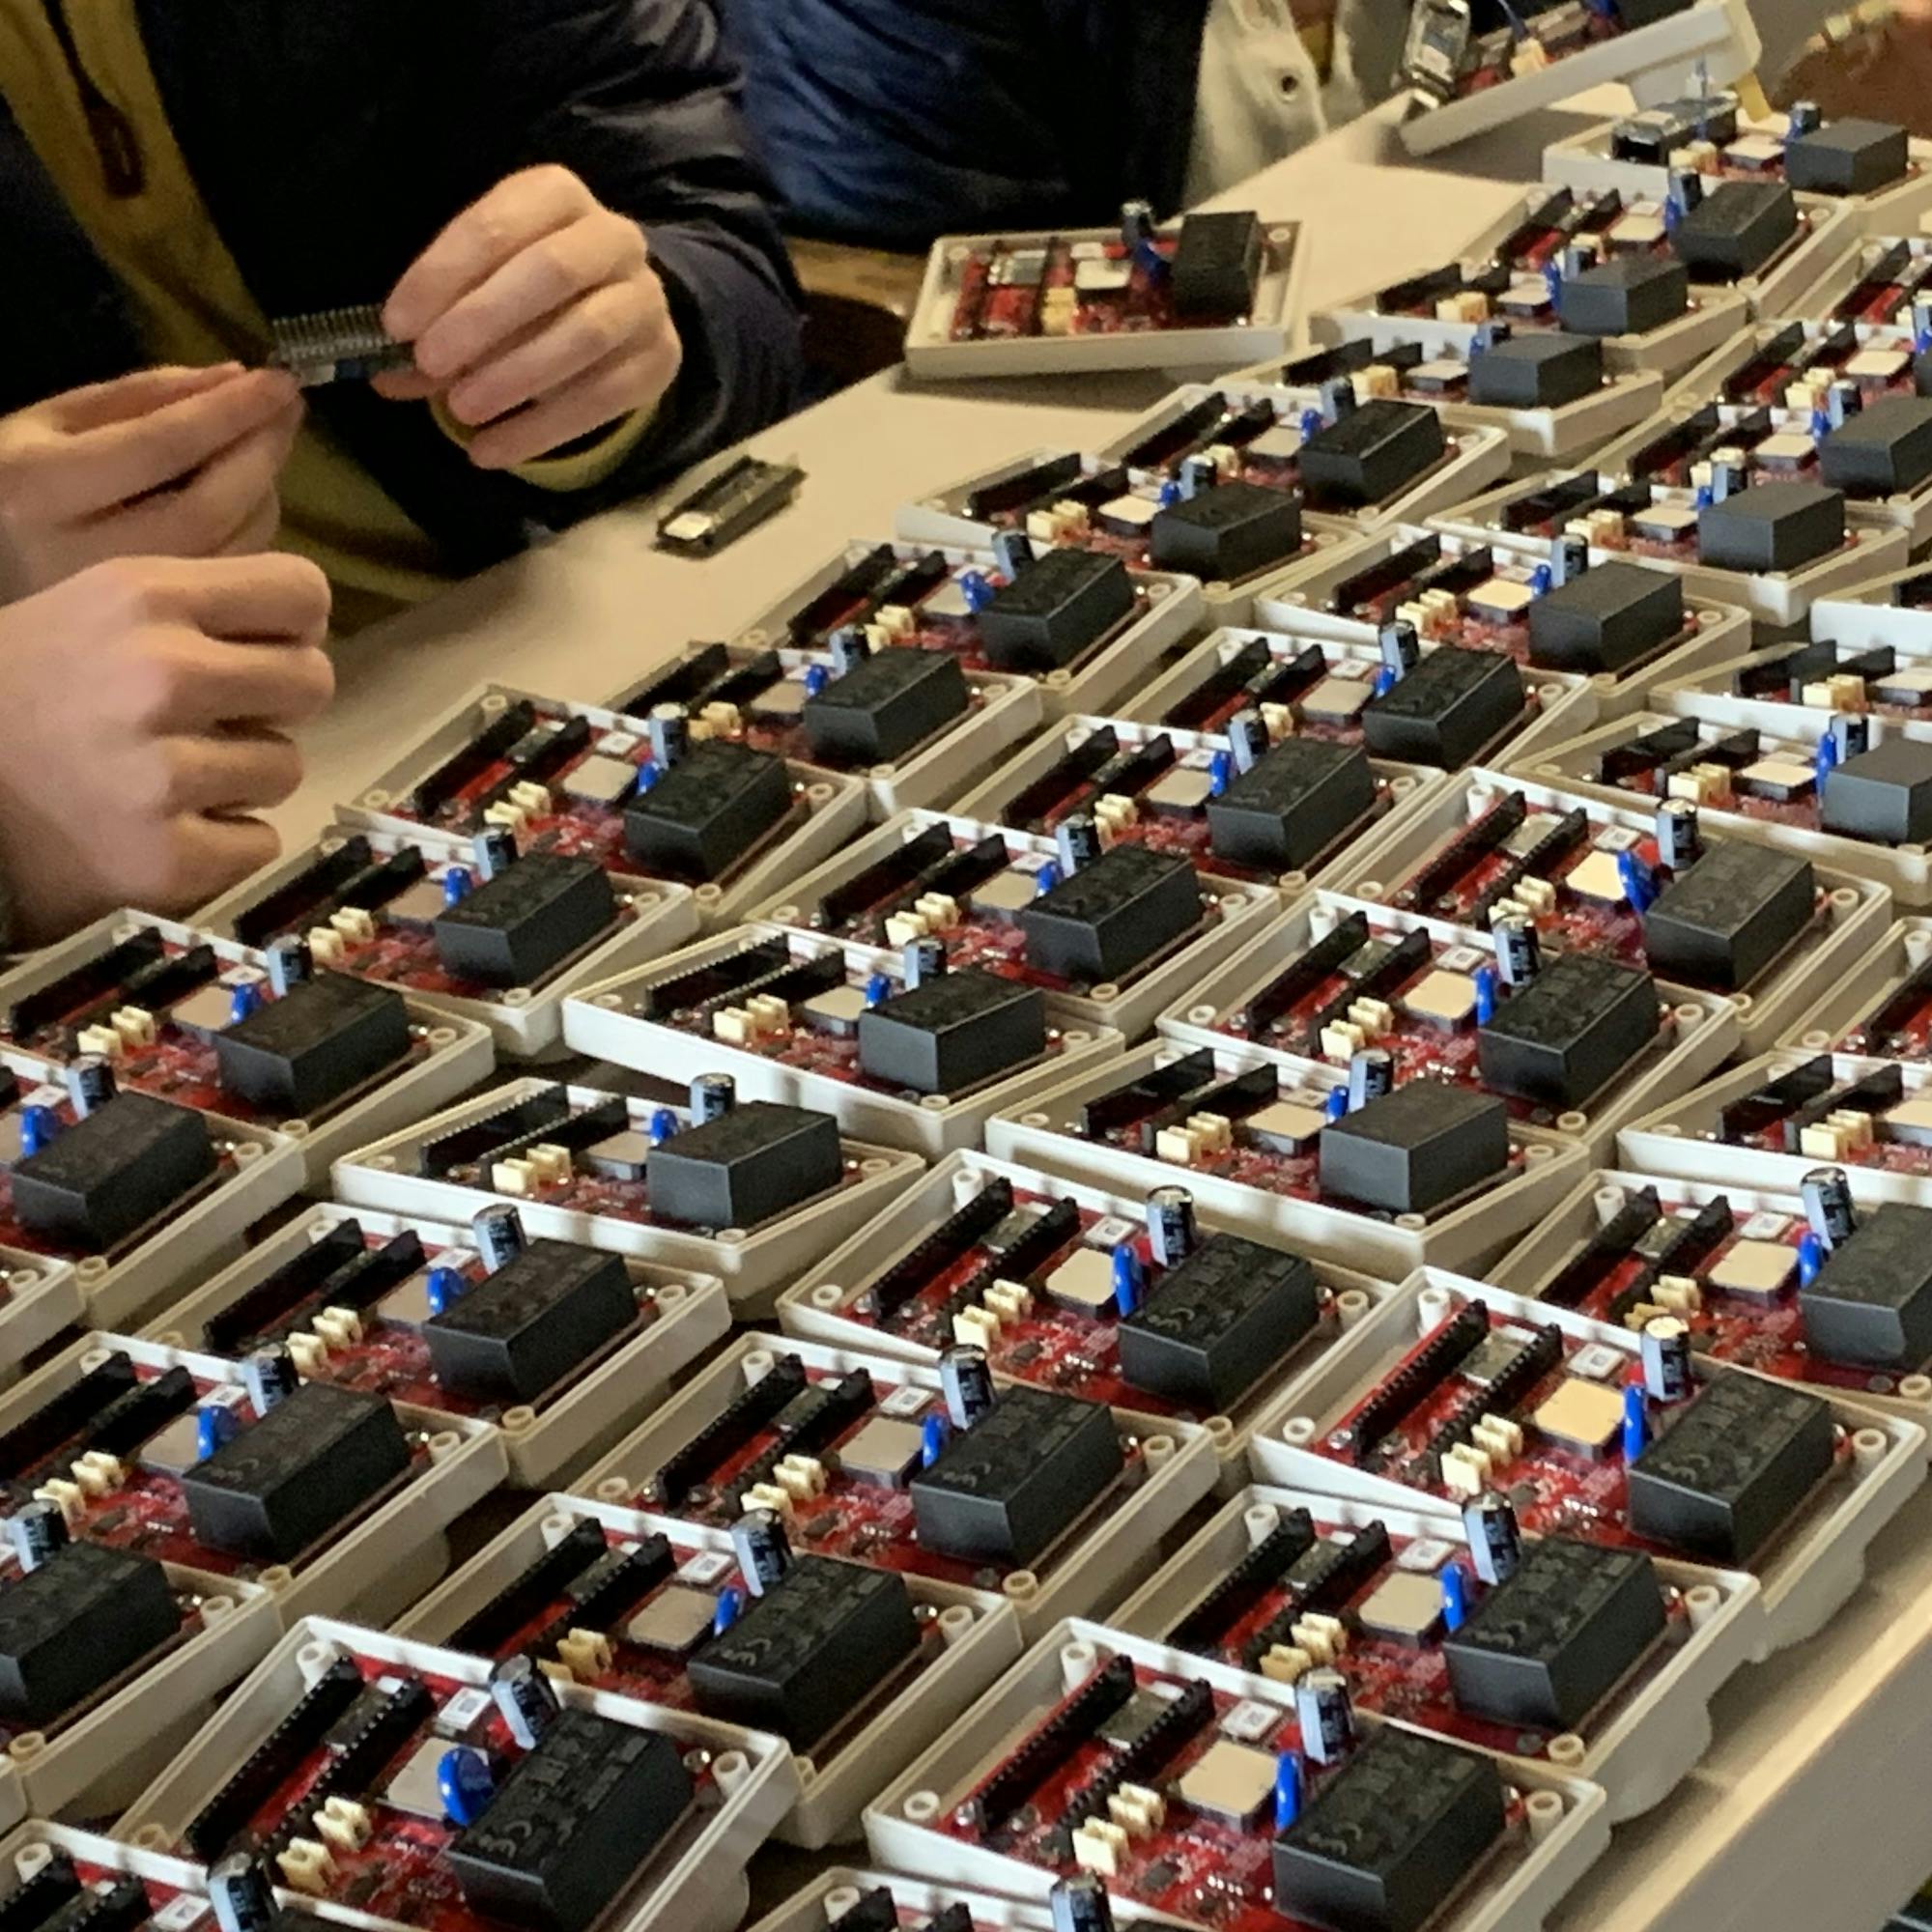 PowerWatch sensors being assembled on a table with the circuit-board exposed.